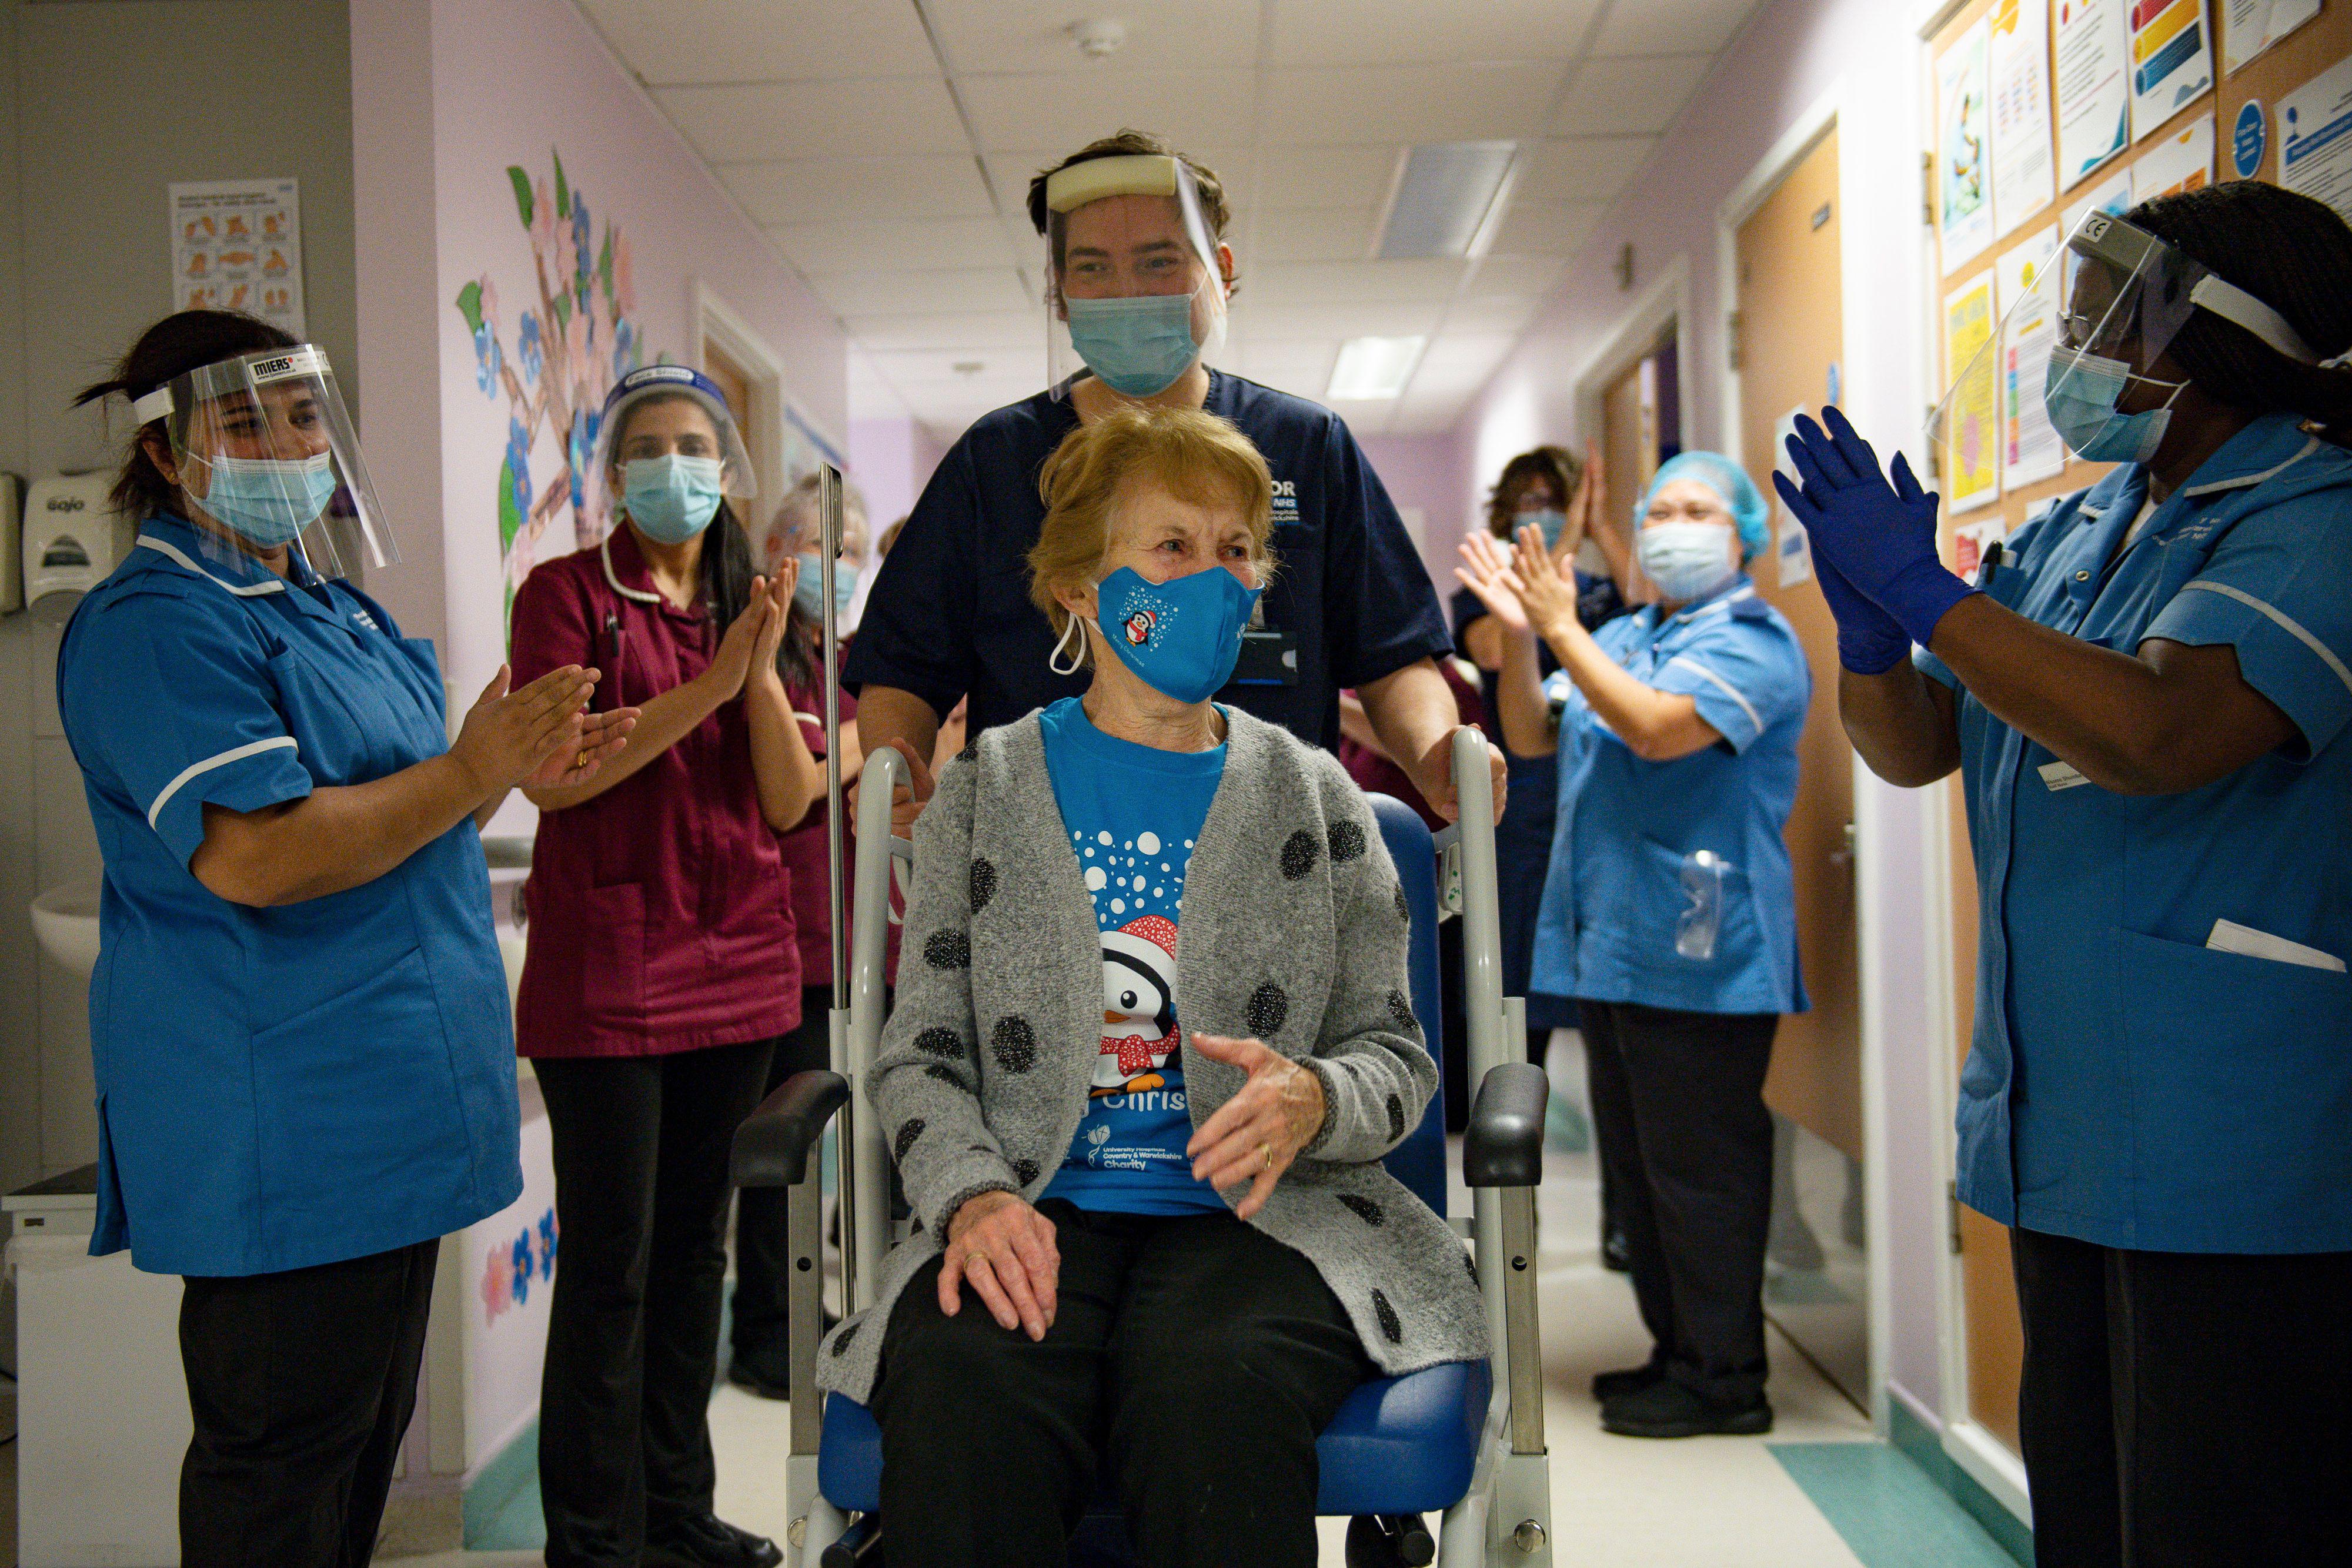 A woman in a wheelchair surrounded by medical professionals clapping